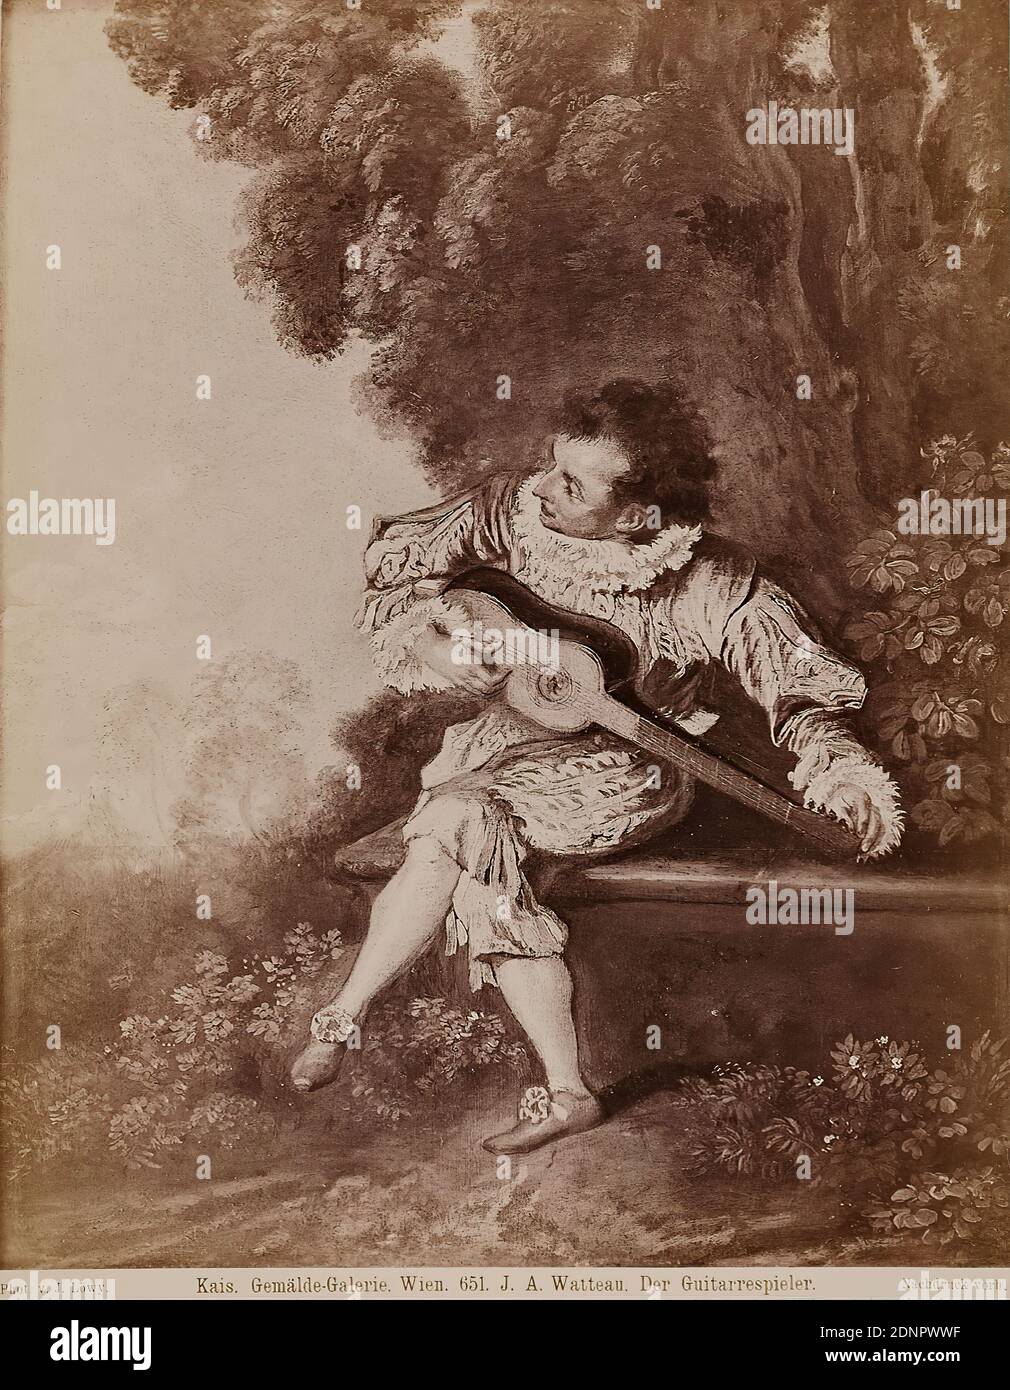 Josef Löwy, 561st J. A. Watteau. The guitar player, albumin paper, black and white positive process, image size: height: 24.7 cm; width: 19.2 cm, inscribed: recto u.: exposed: phot. v. J. Löwy. Quays. Painting Gallery, Vienna. 651st J. A. Watteau, The Guitar Player. Reprint before, kithara, mandolin, guitar, balalaika, musician Stock Photo